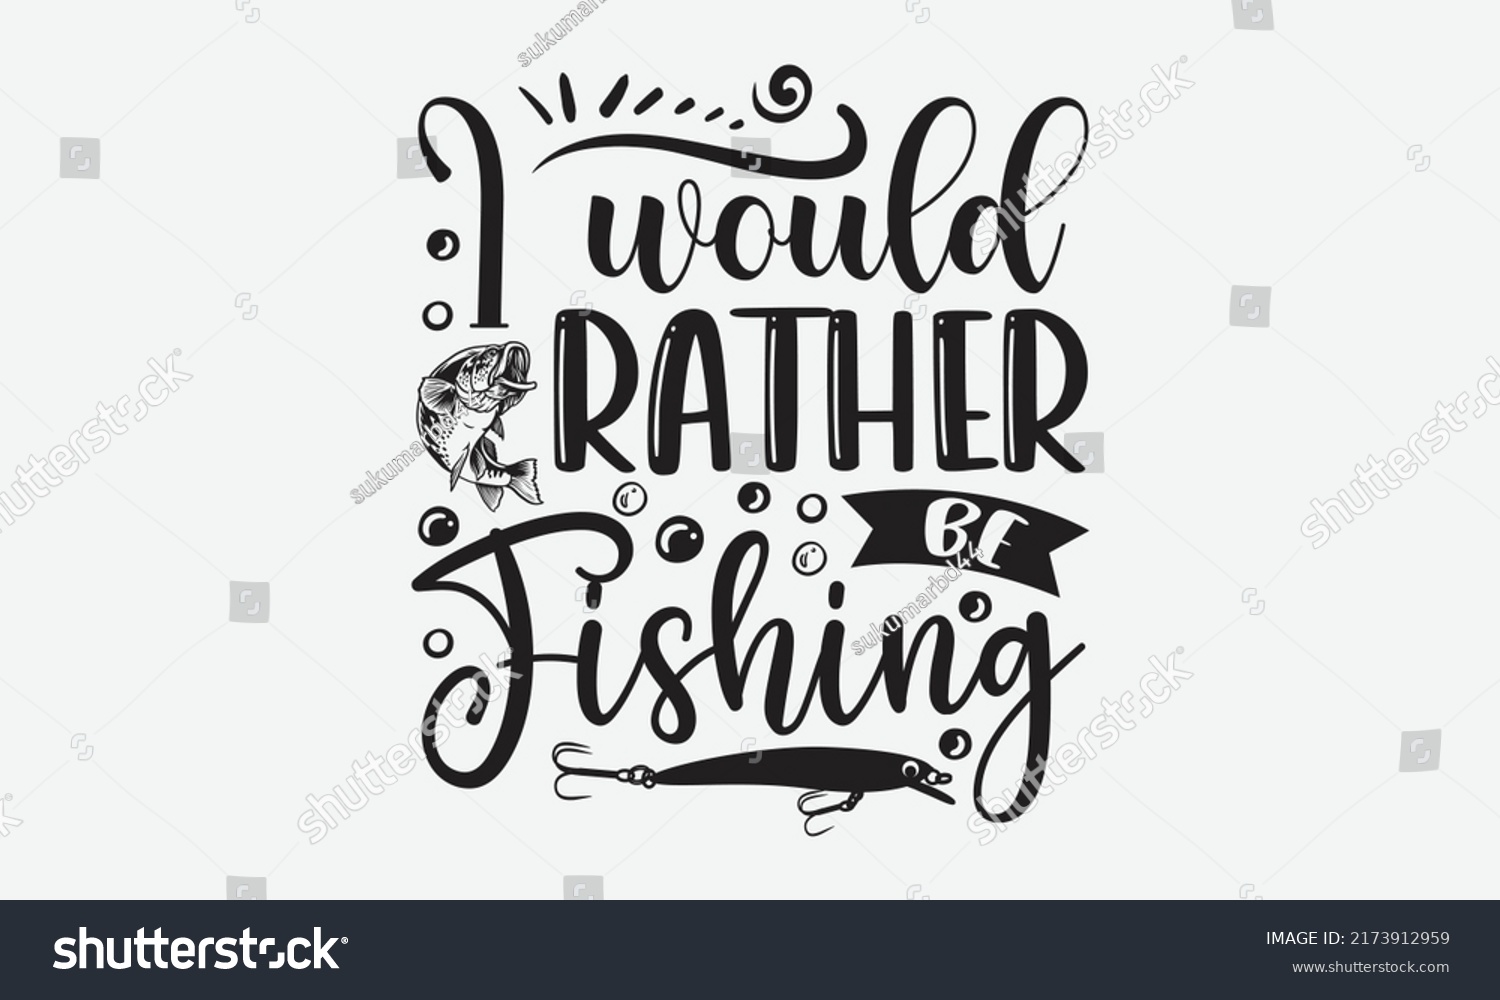 SVG of I would rather be fishing - Fishing t shirt design, svg eps Files for Cutting, Handmade calligraphy vector illustration, Hand written vector sign, svg svg